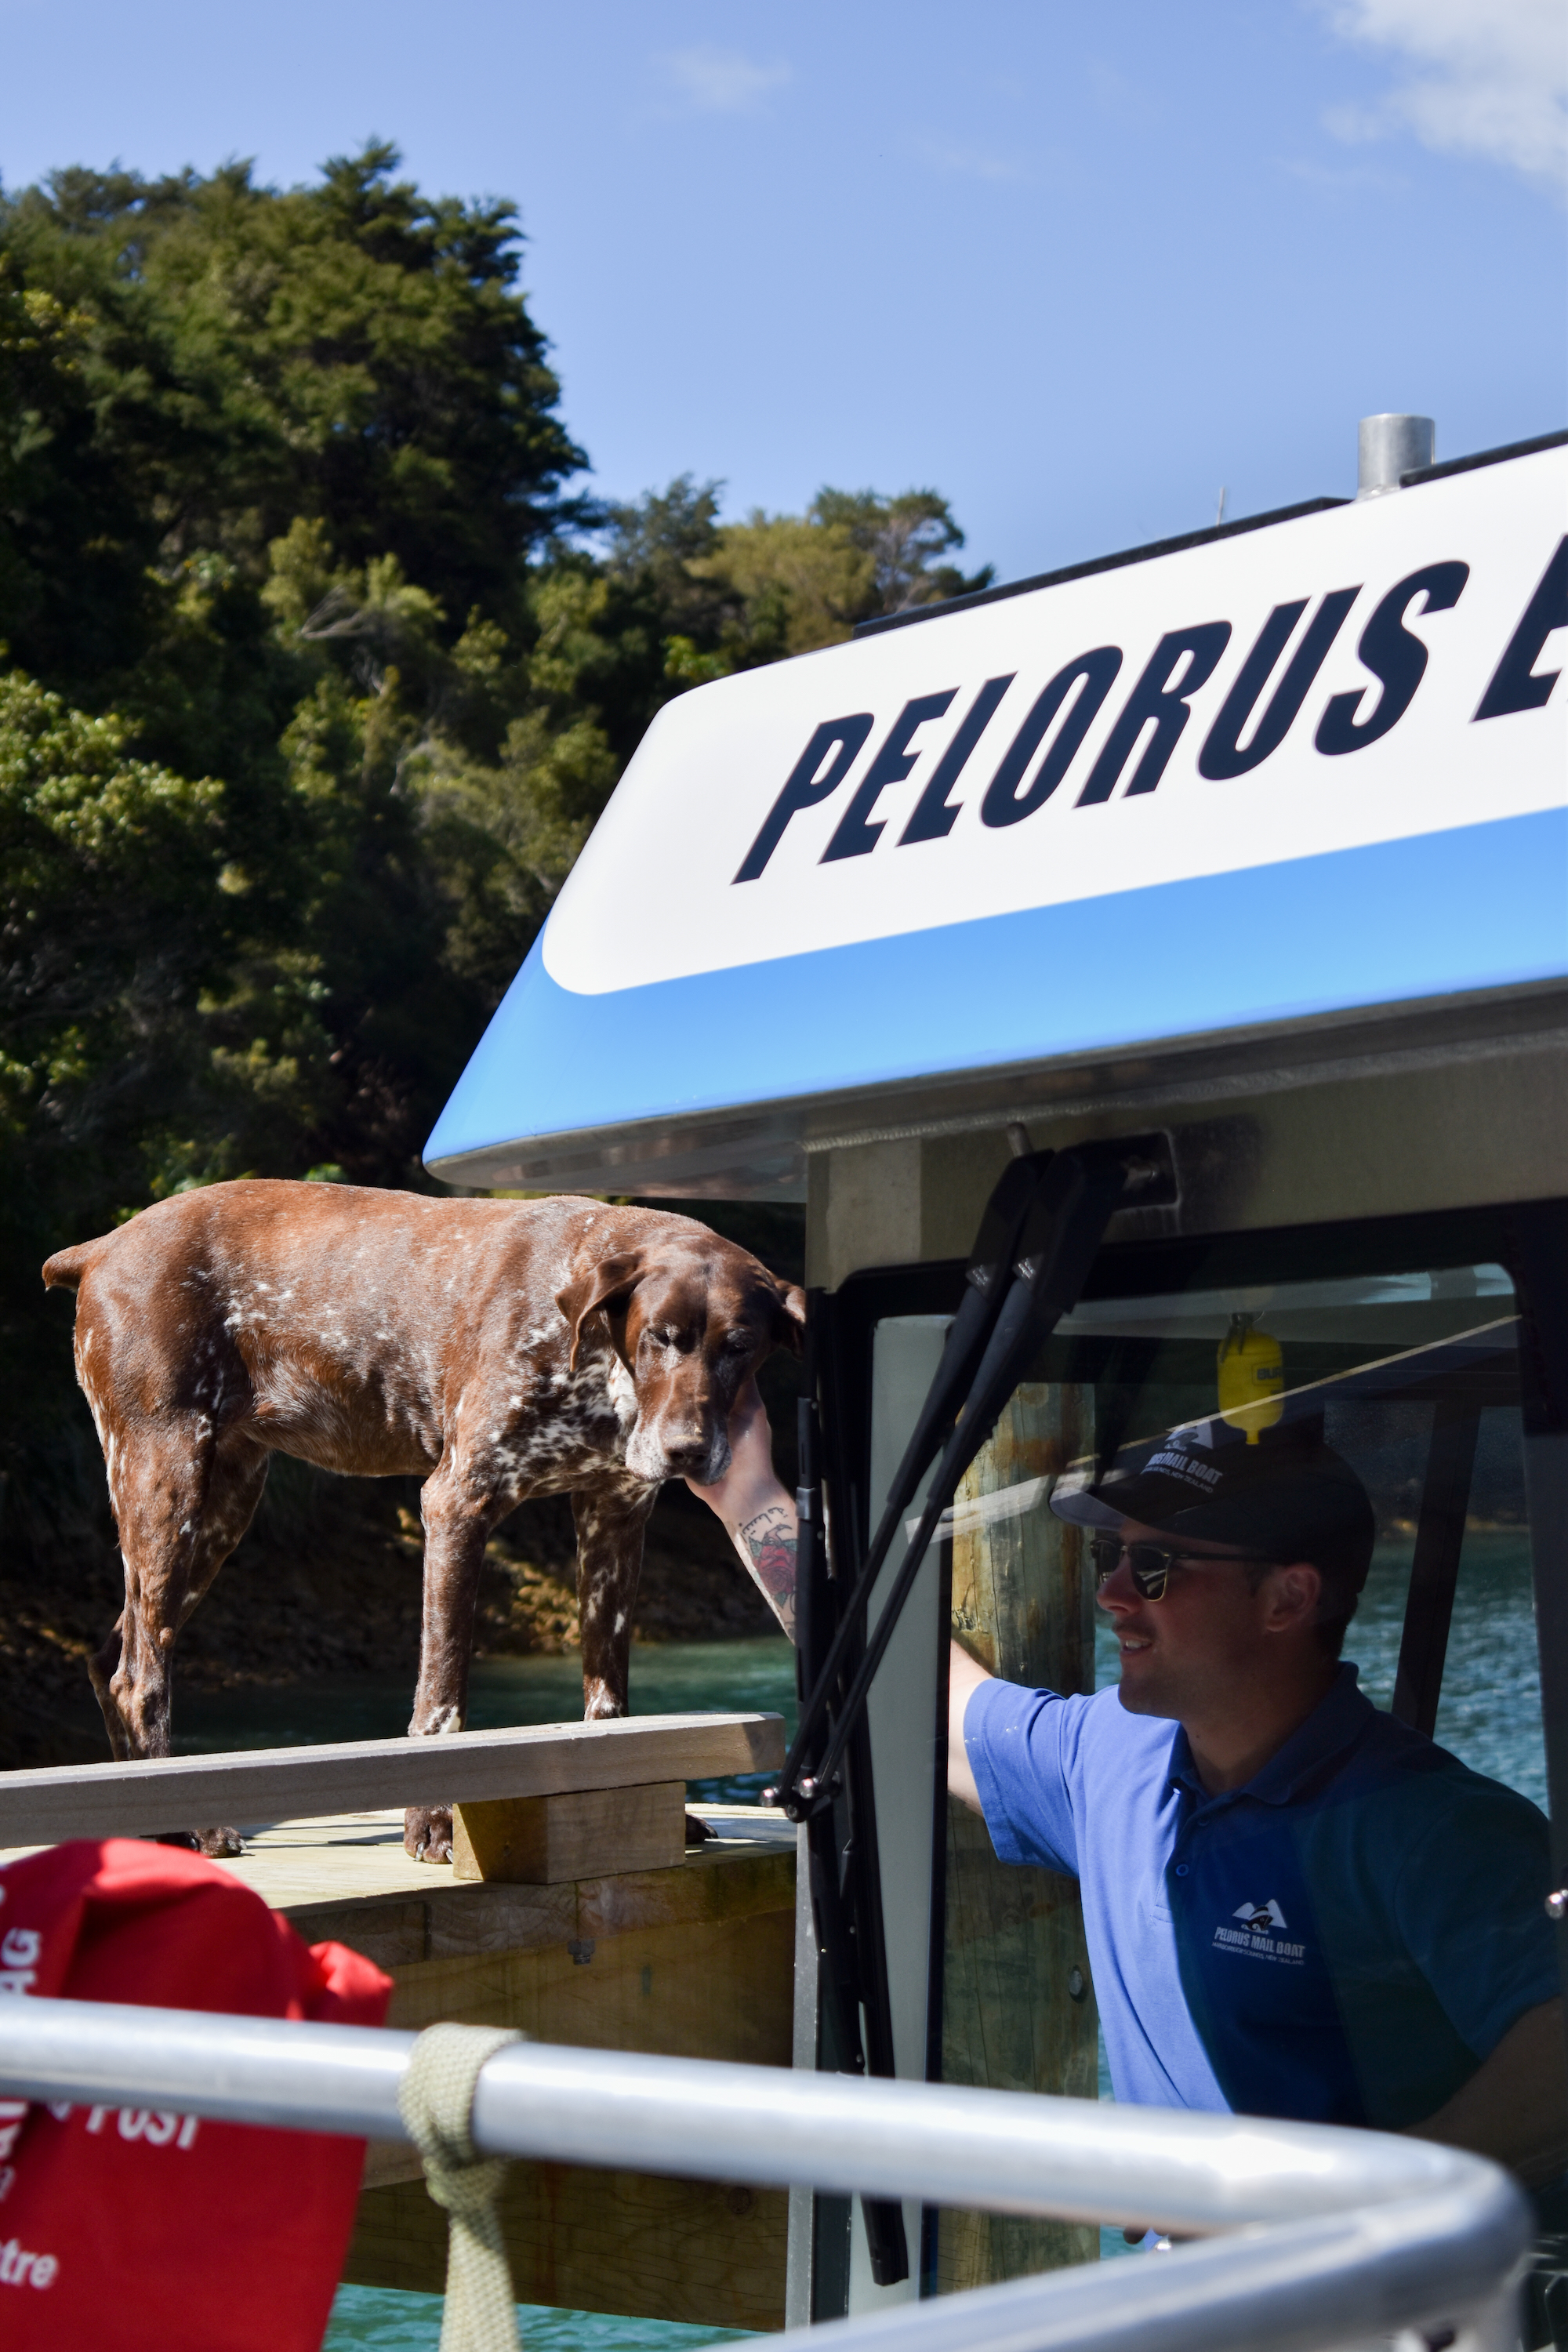 Dog on jetty being patted by Pelorus Mail Boat skipper.